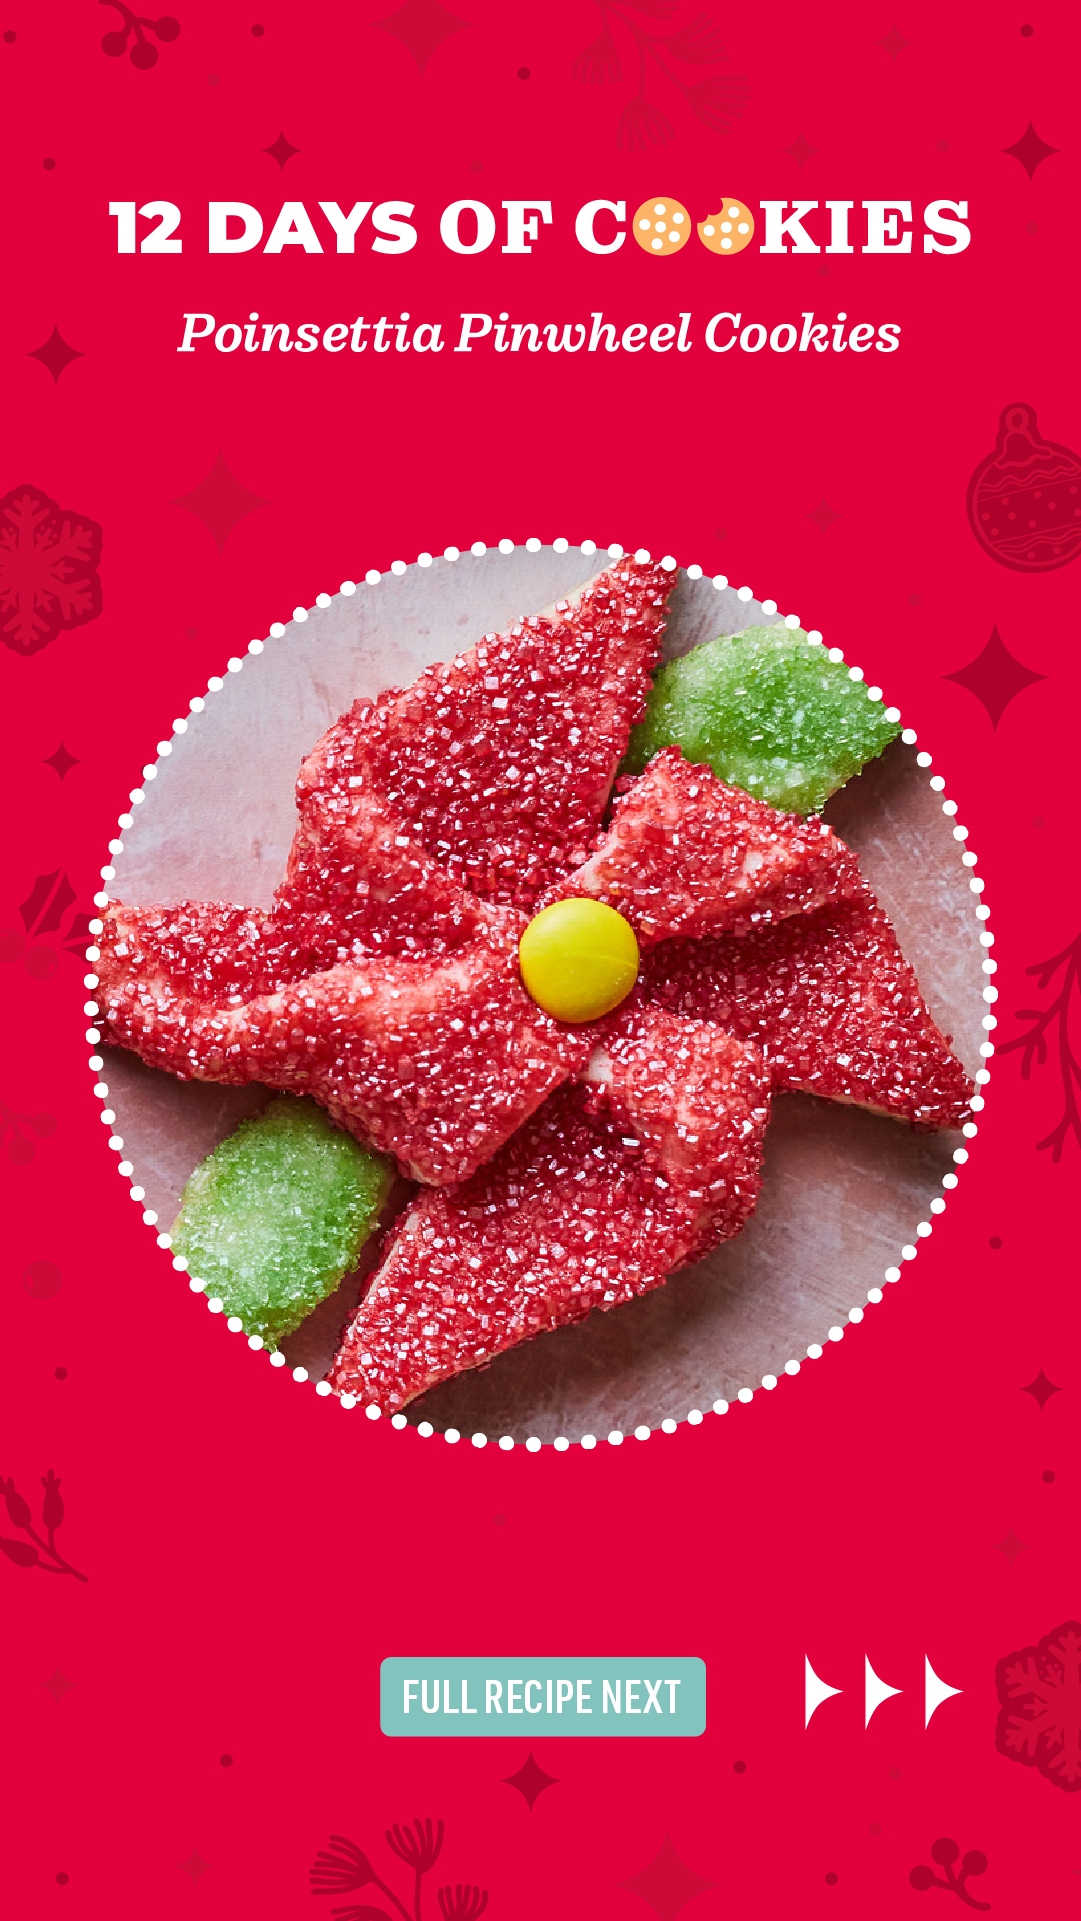 FN-Canva Template-12 Days of Cookies-RED-v1_5-1.png